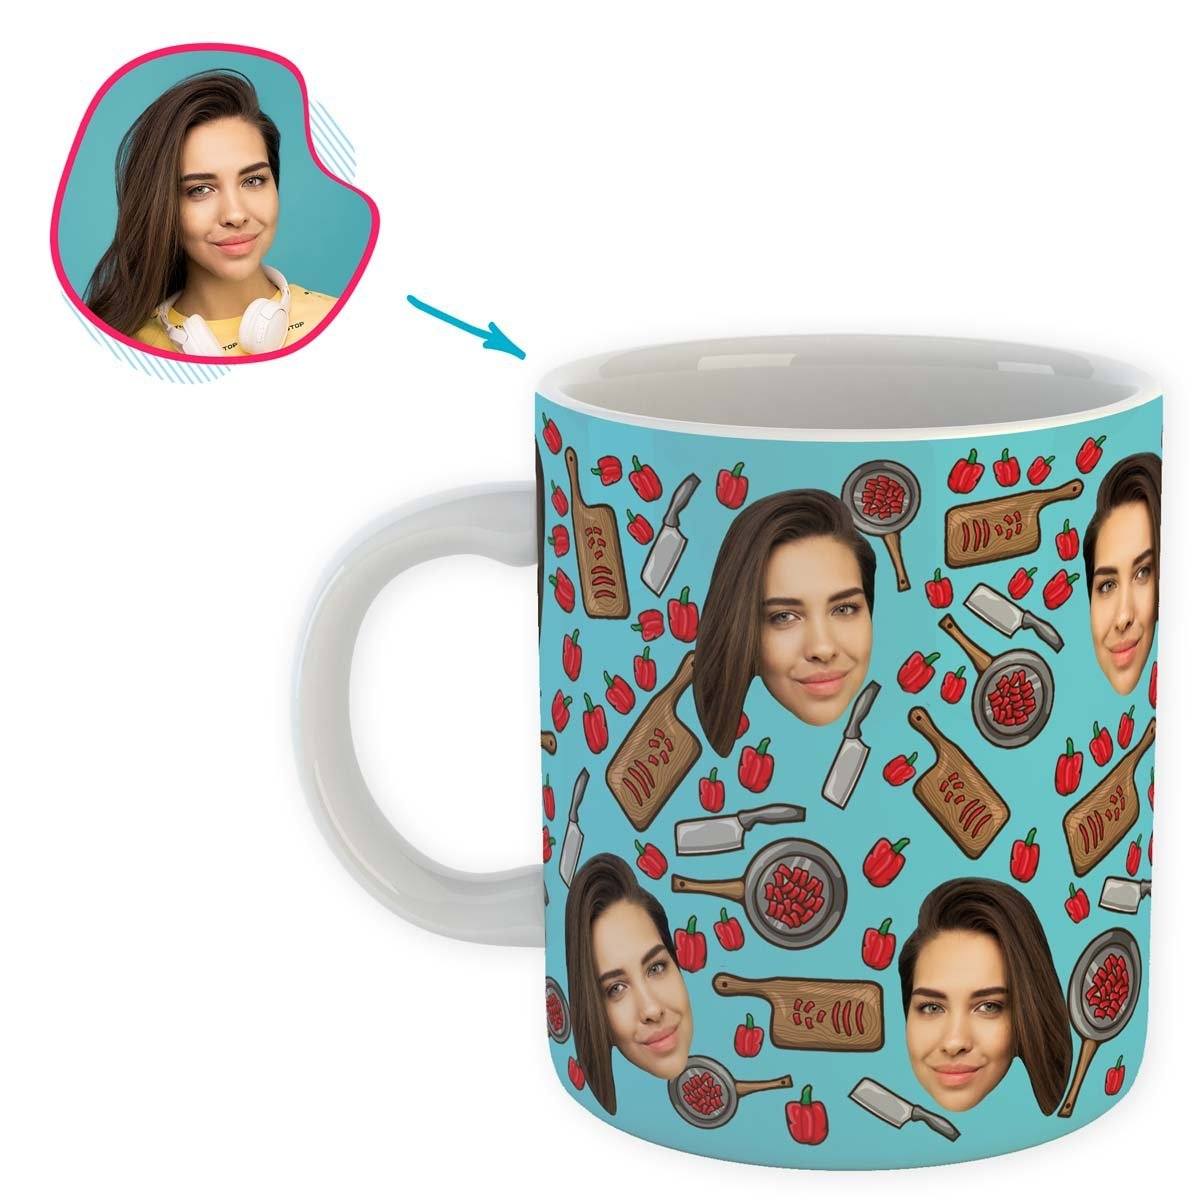 blue Сooking mug personalized with photo of face printed on it